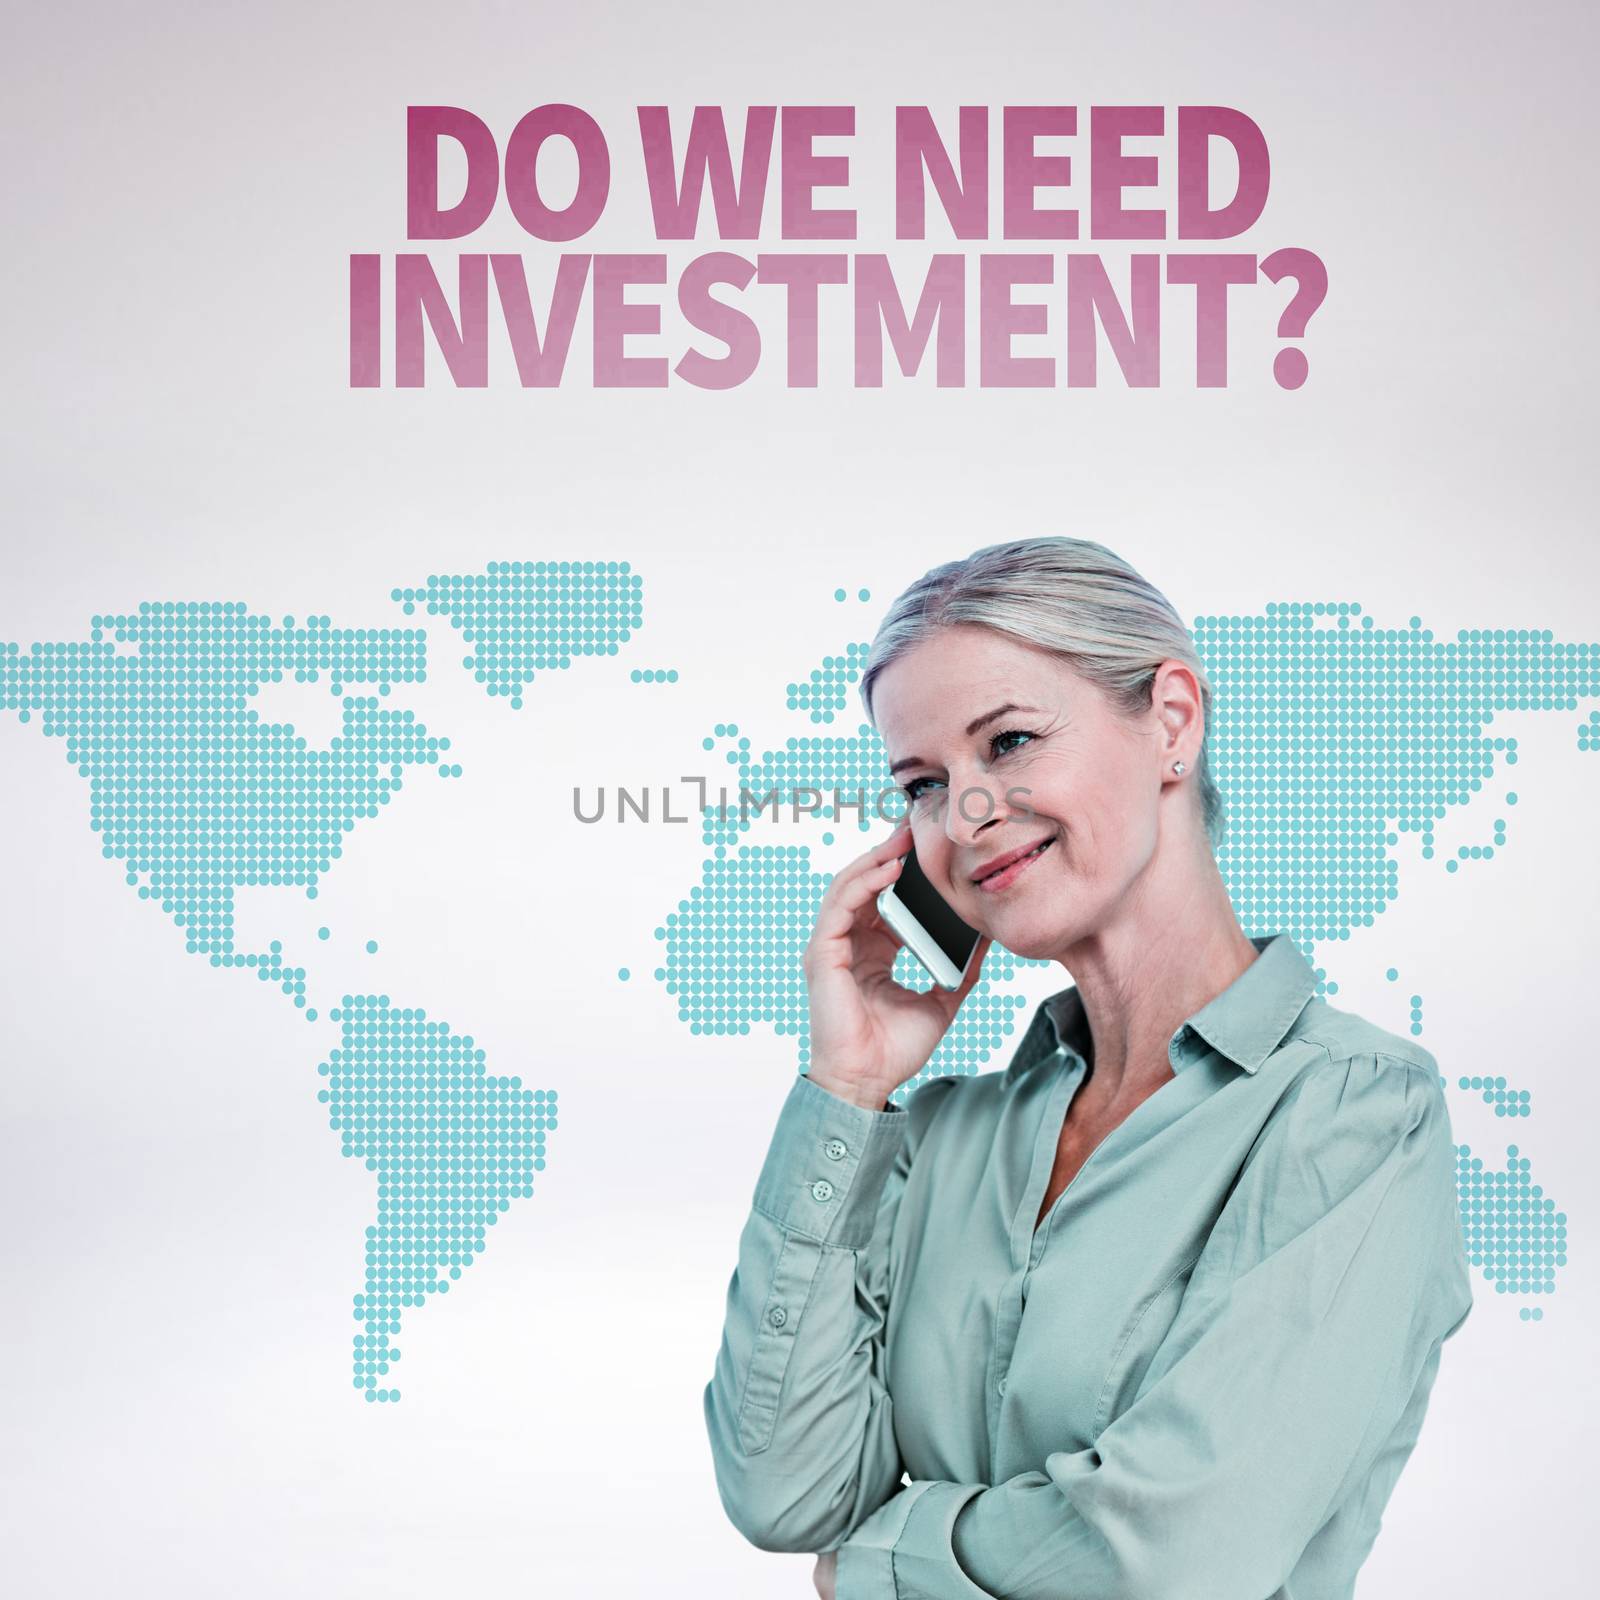 Smiling businesswoman having a phone call against green world map on white background